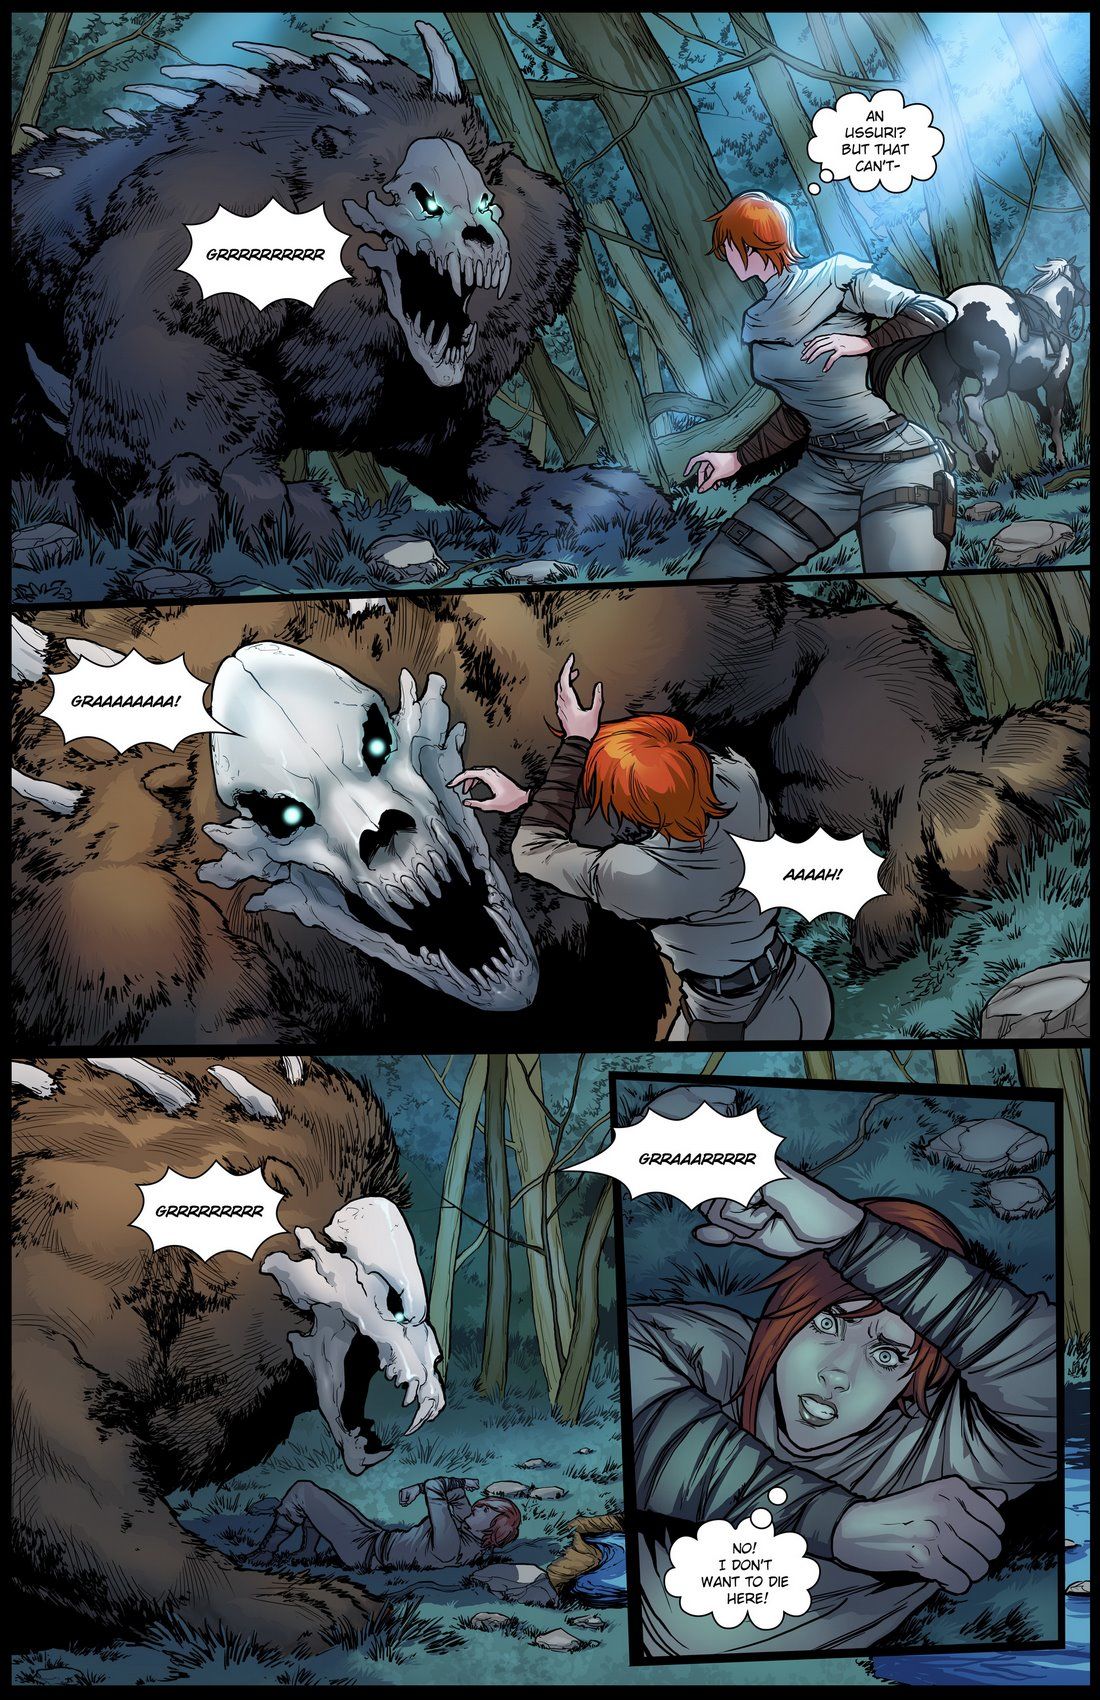 The Strong Shall Survive Issue 02 MuscleFan page 5